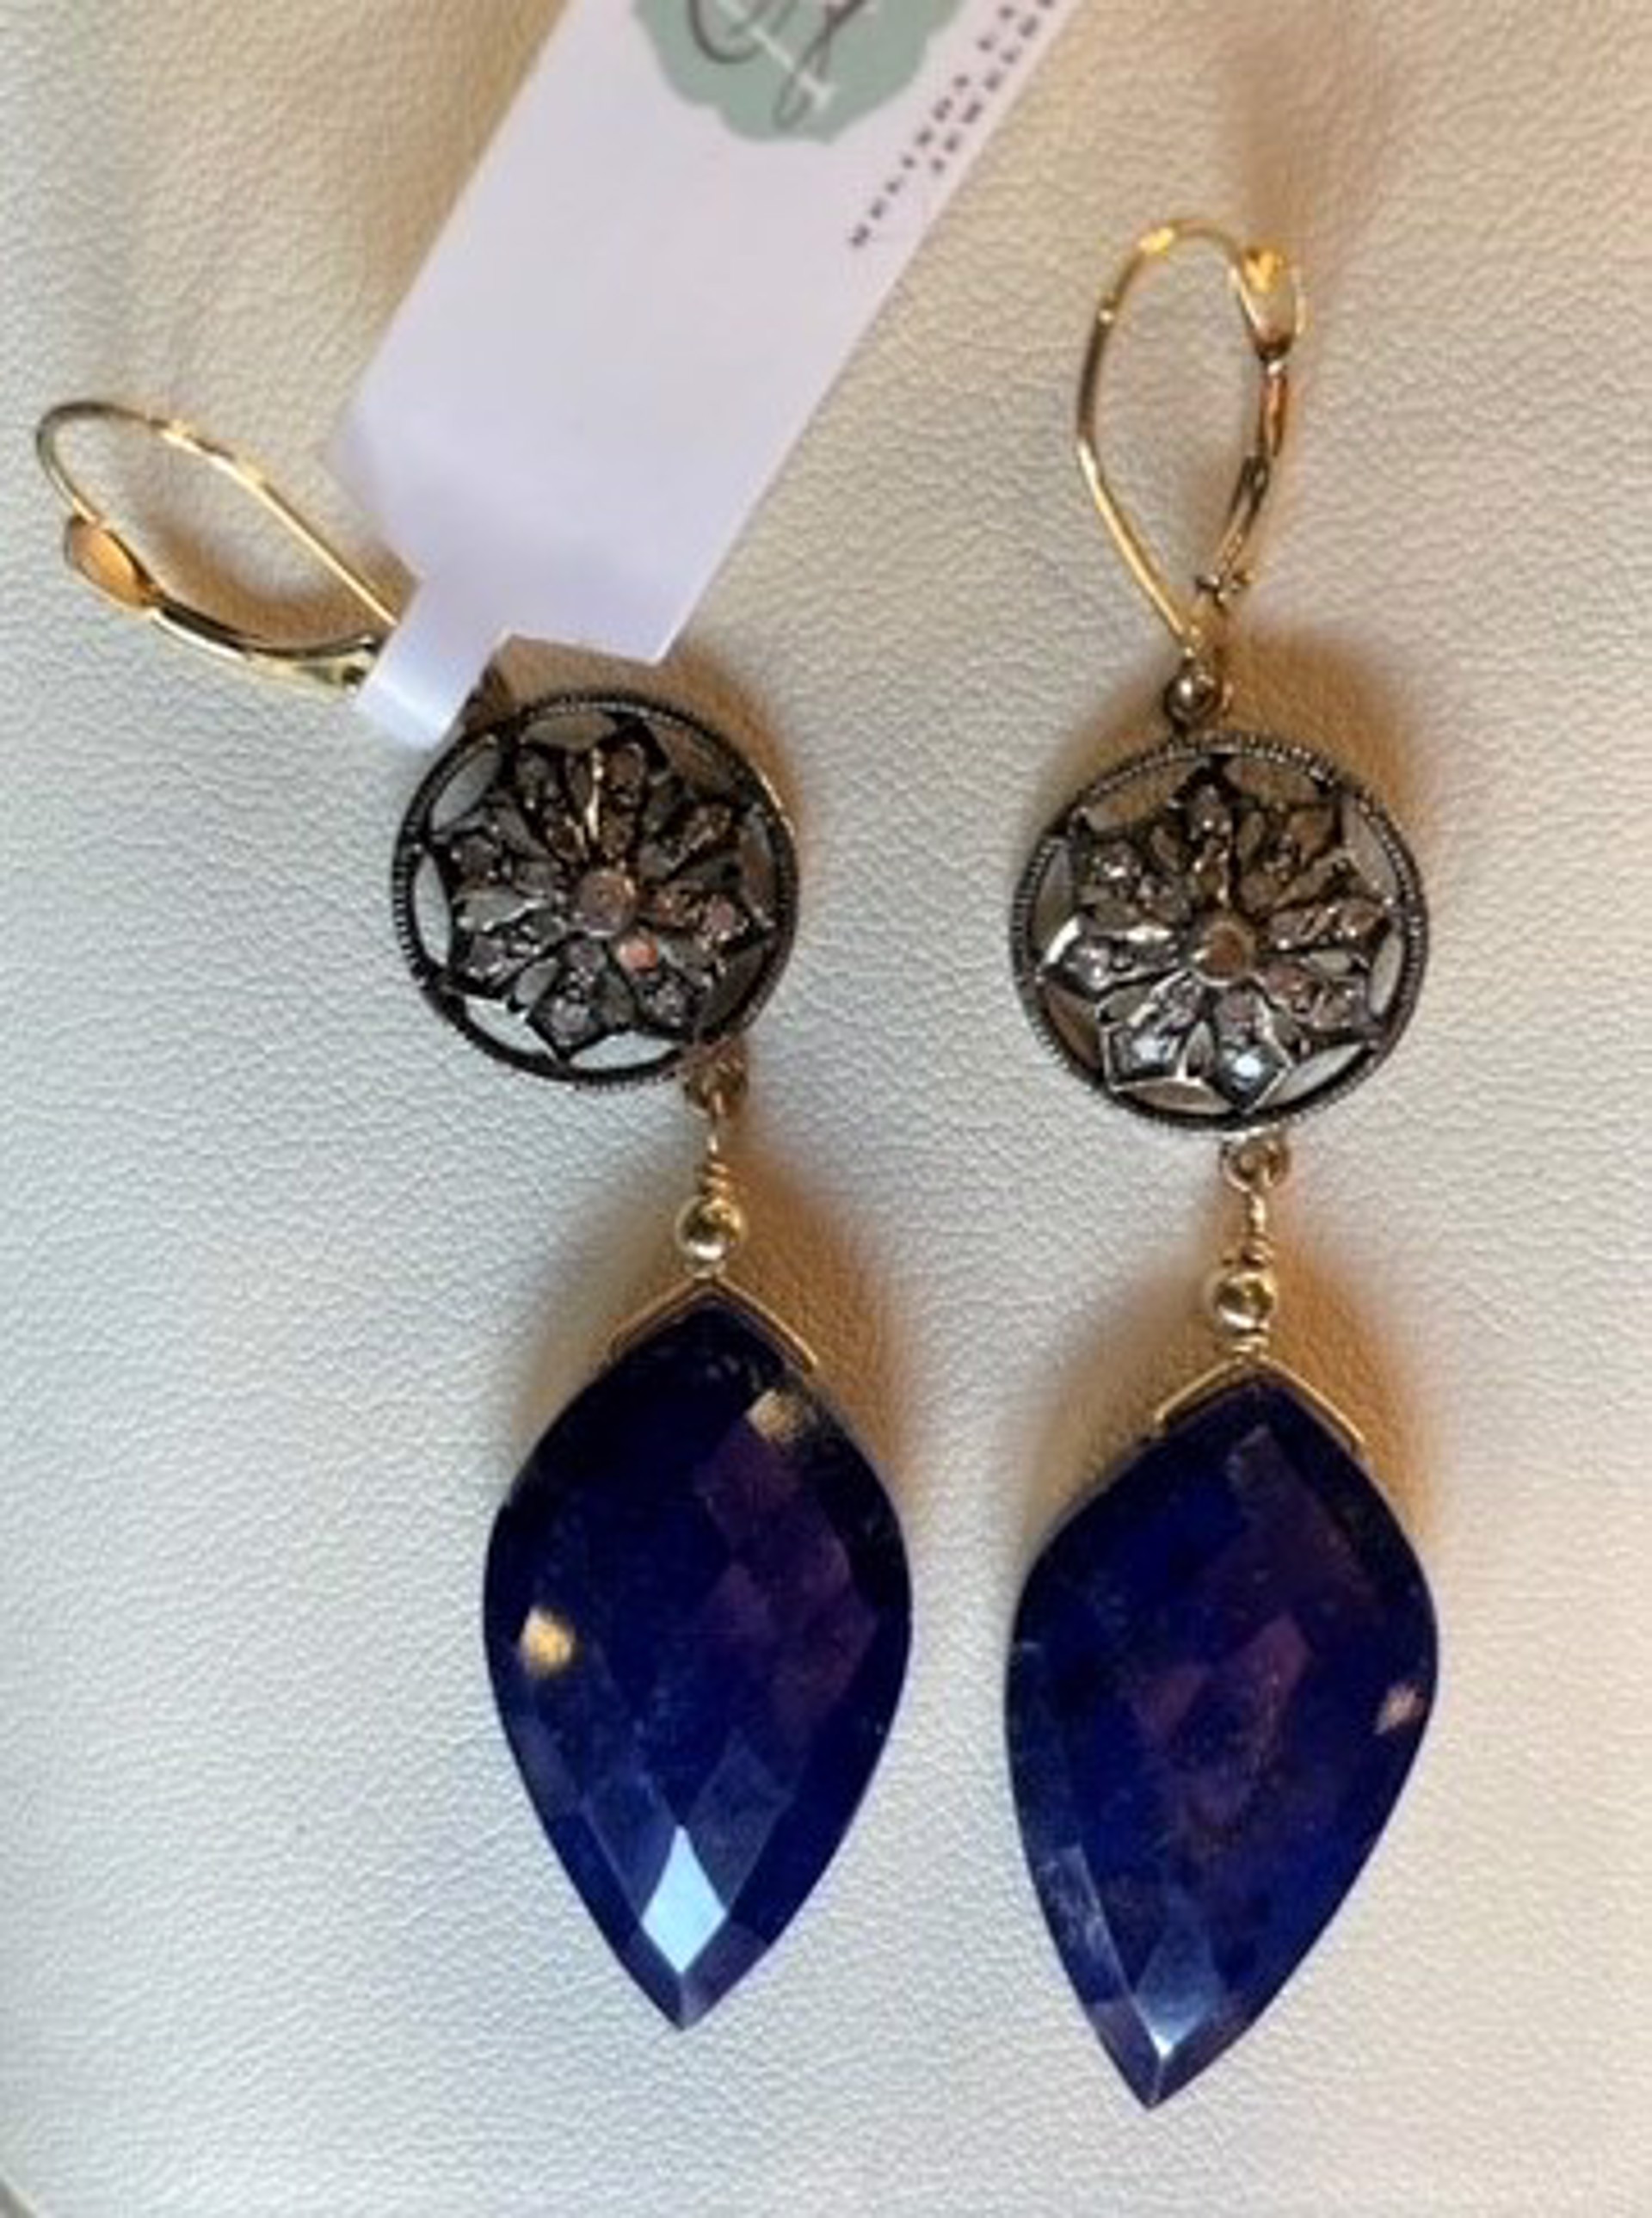 AAA Lapis Lazuli briolettes on discs of pave diamonds in oxidized sterling in 14k gold by Melinda Lawton Jewelry